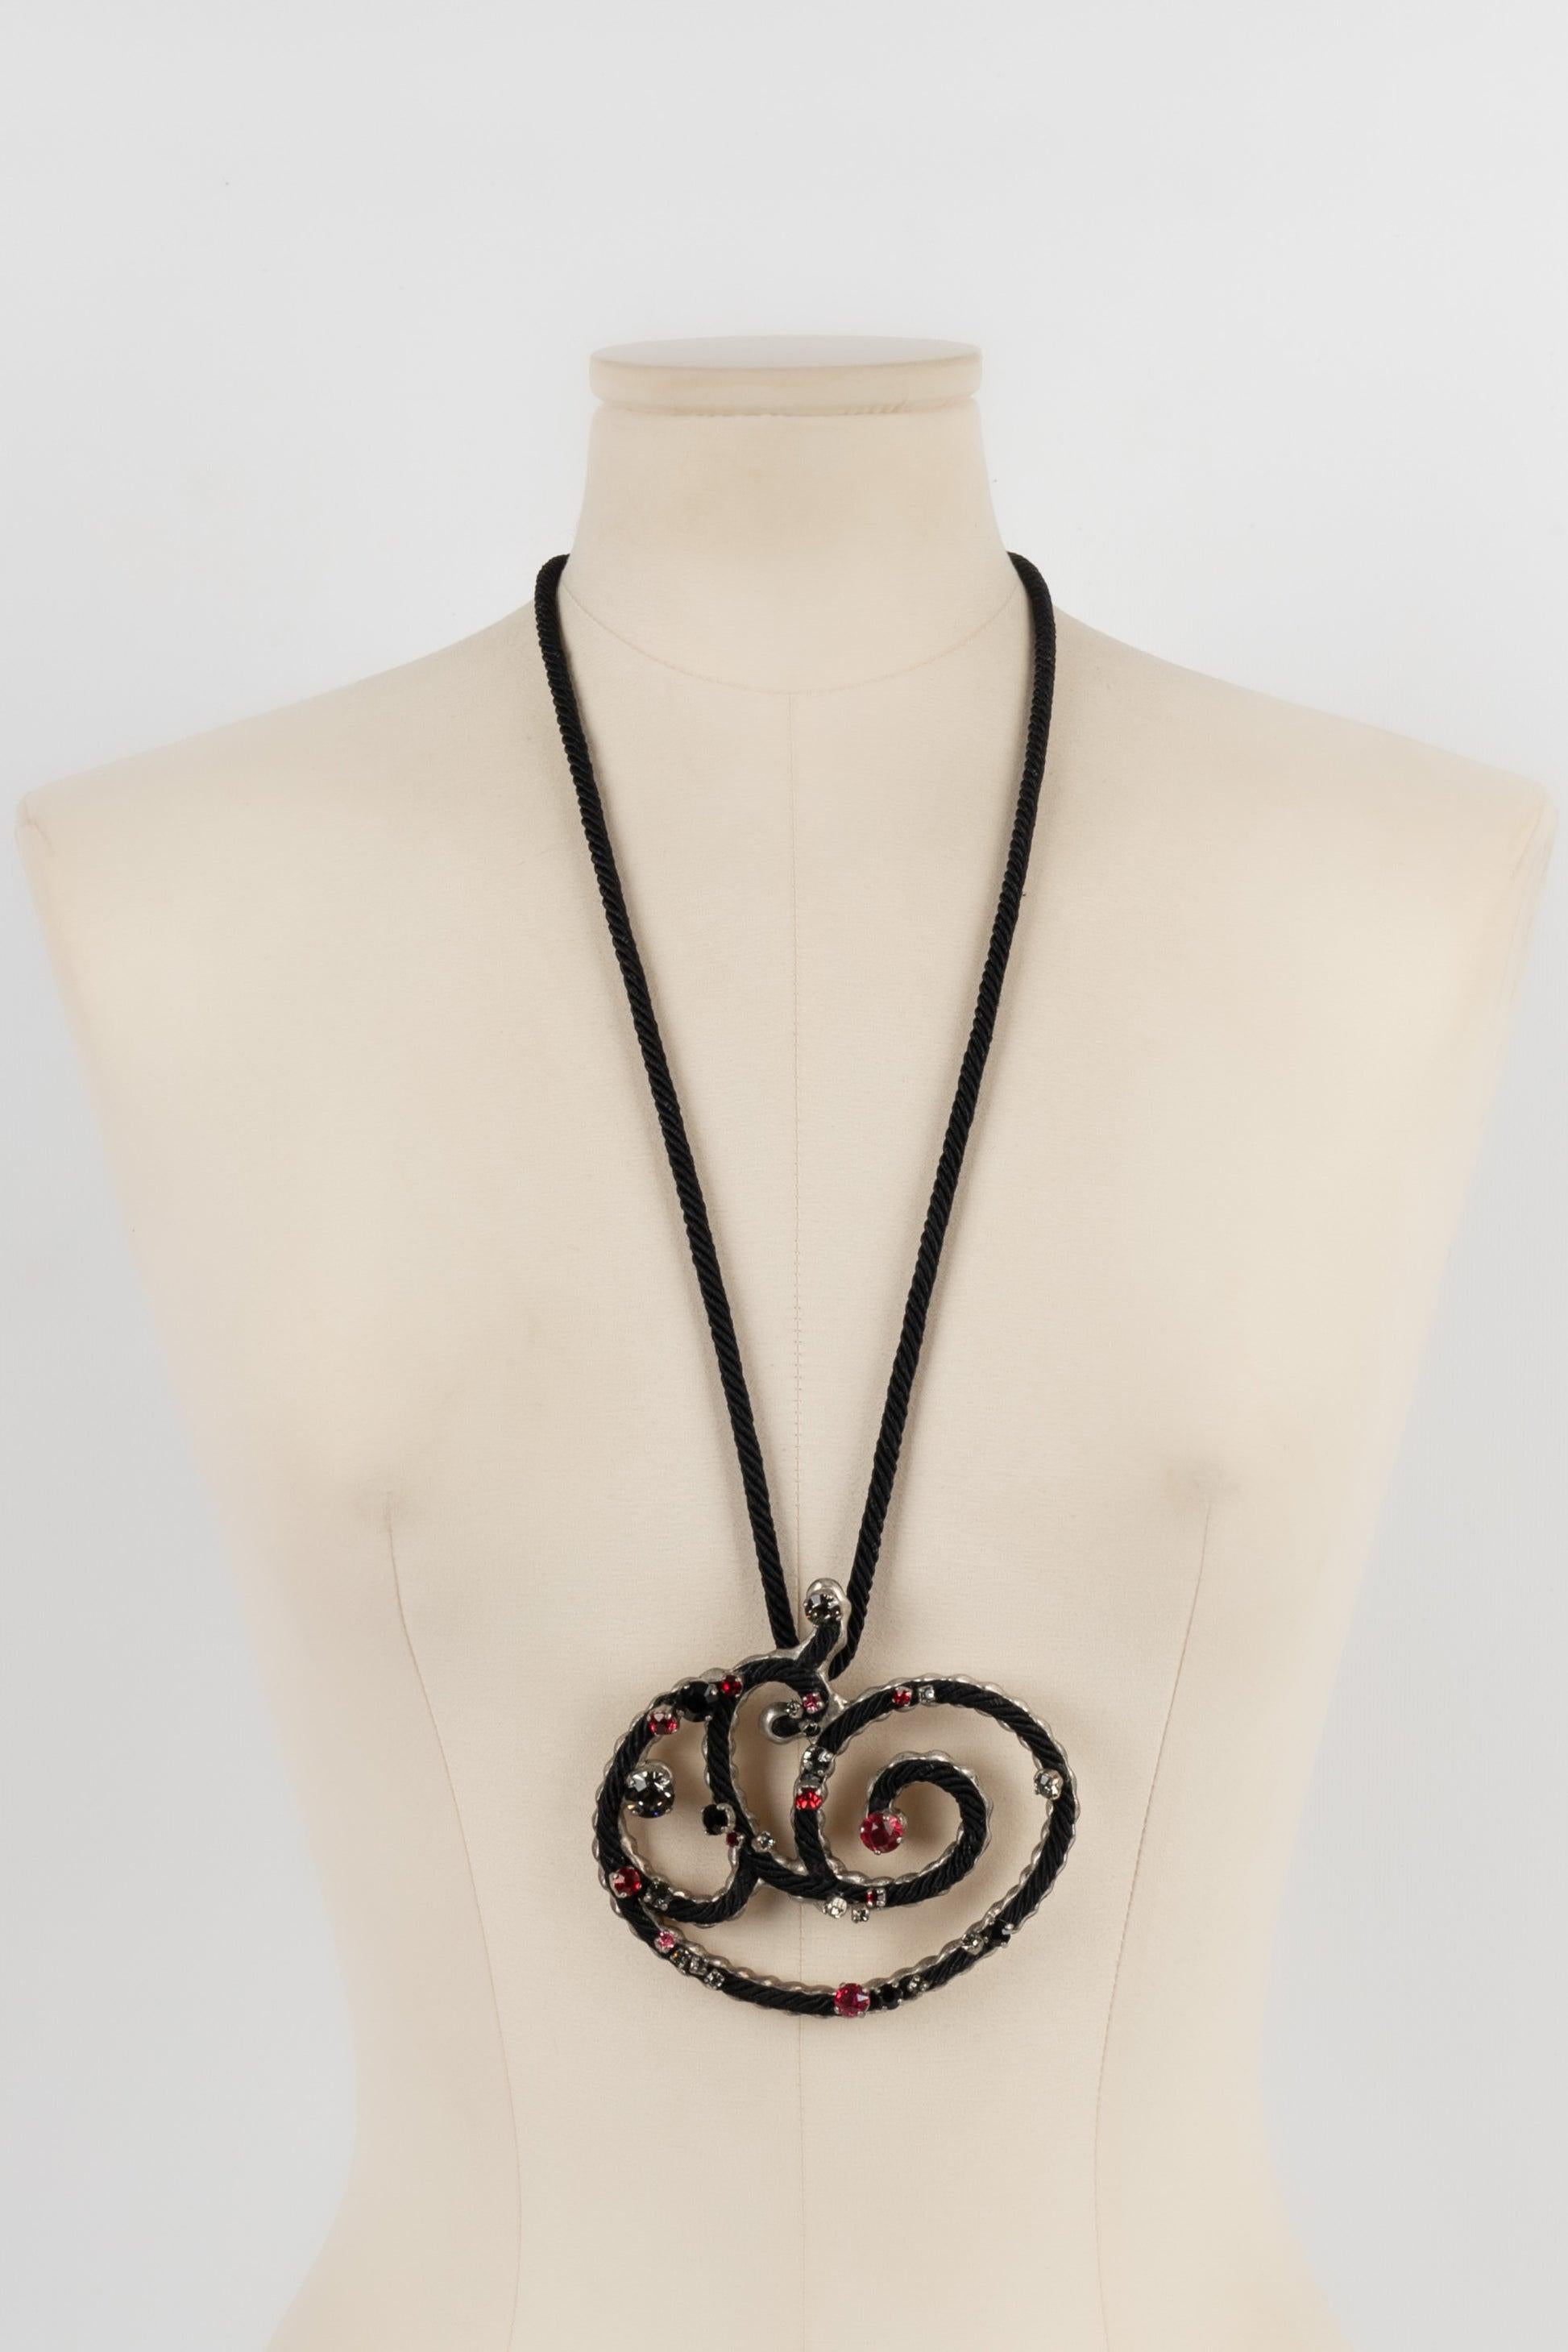 Yves Saint Laurent - Necklace with a black trimmings link holding back a silvery metal, trimmings, and rhinestone pendant.

Additional information:
Condition: Very good condition
Dimensions: Length: 77 cm

Seller Reference: BC148